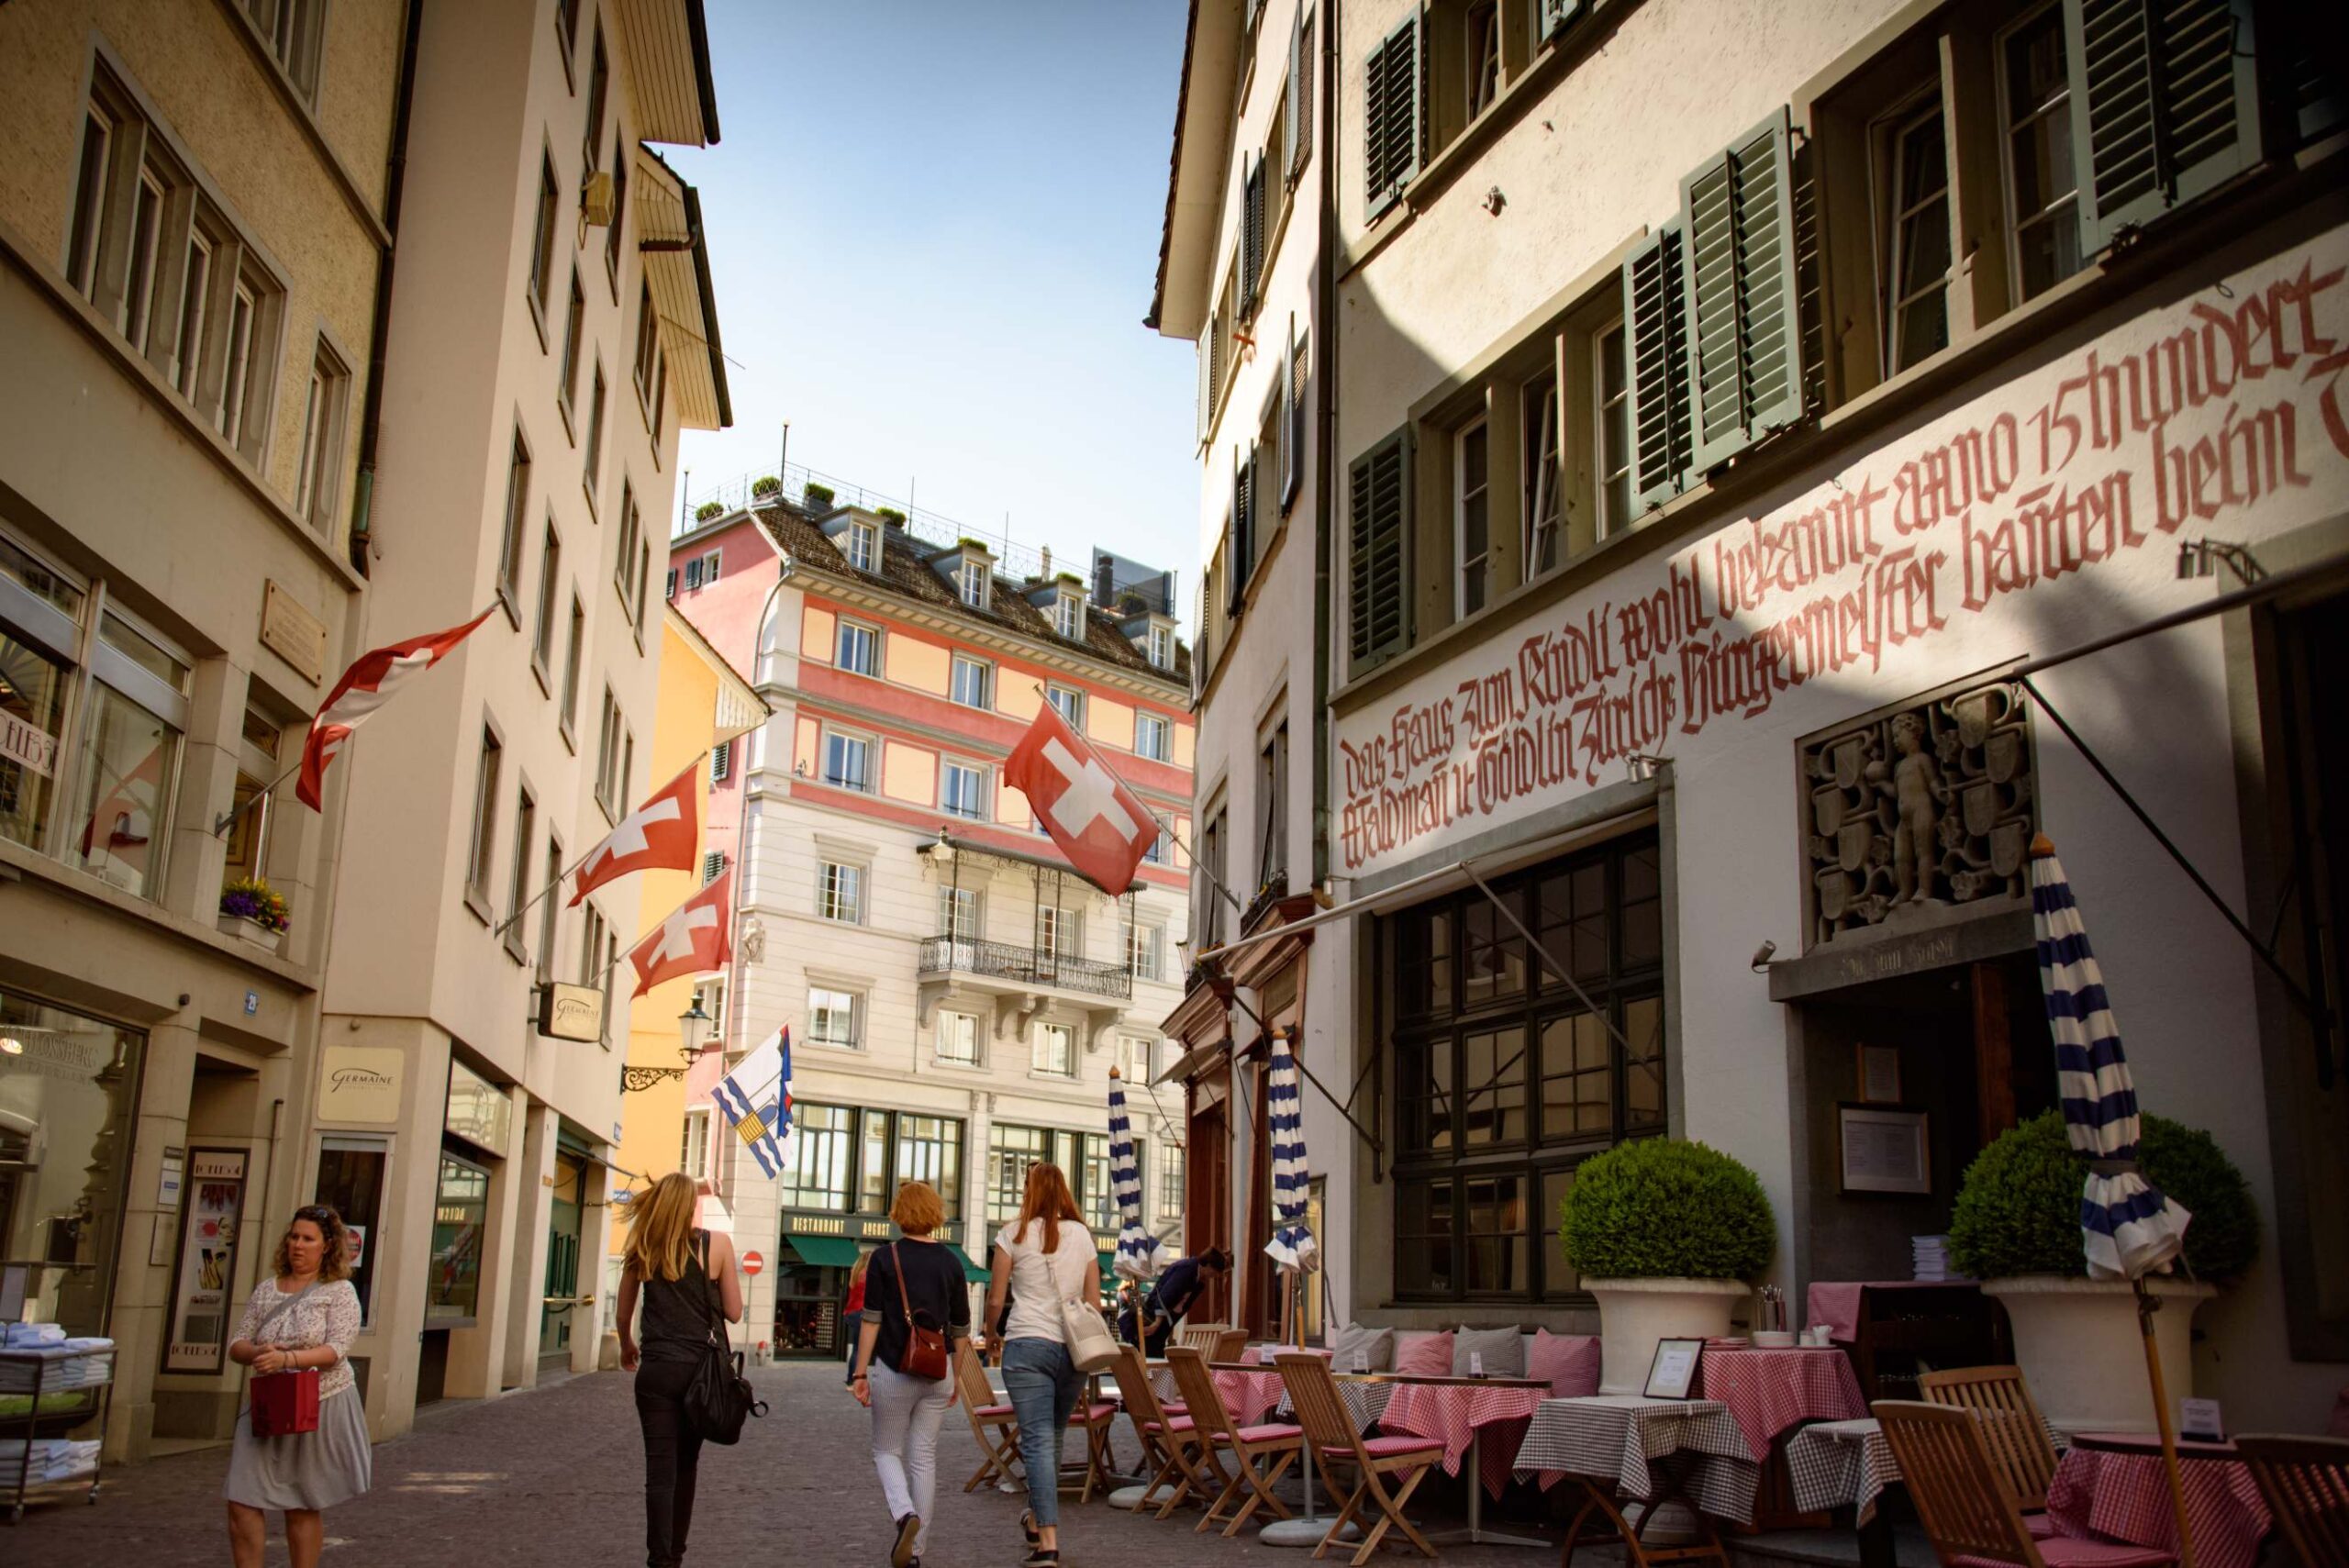 One day in Zurich: The best places to visit